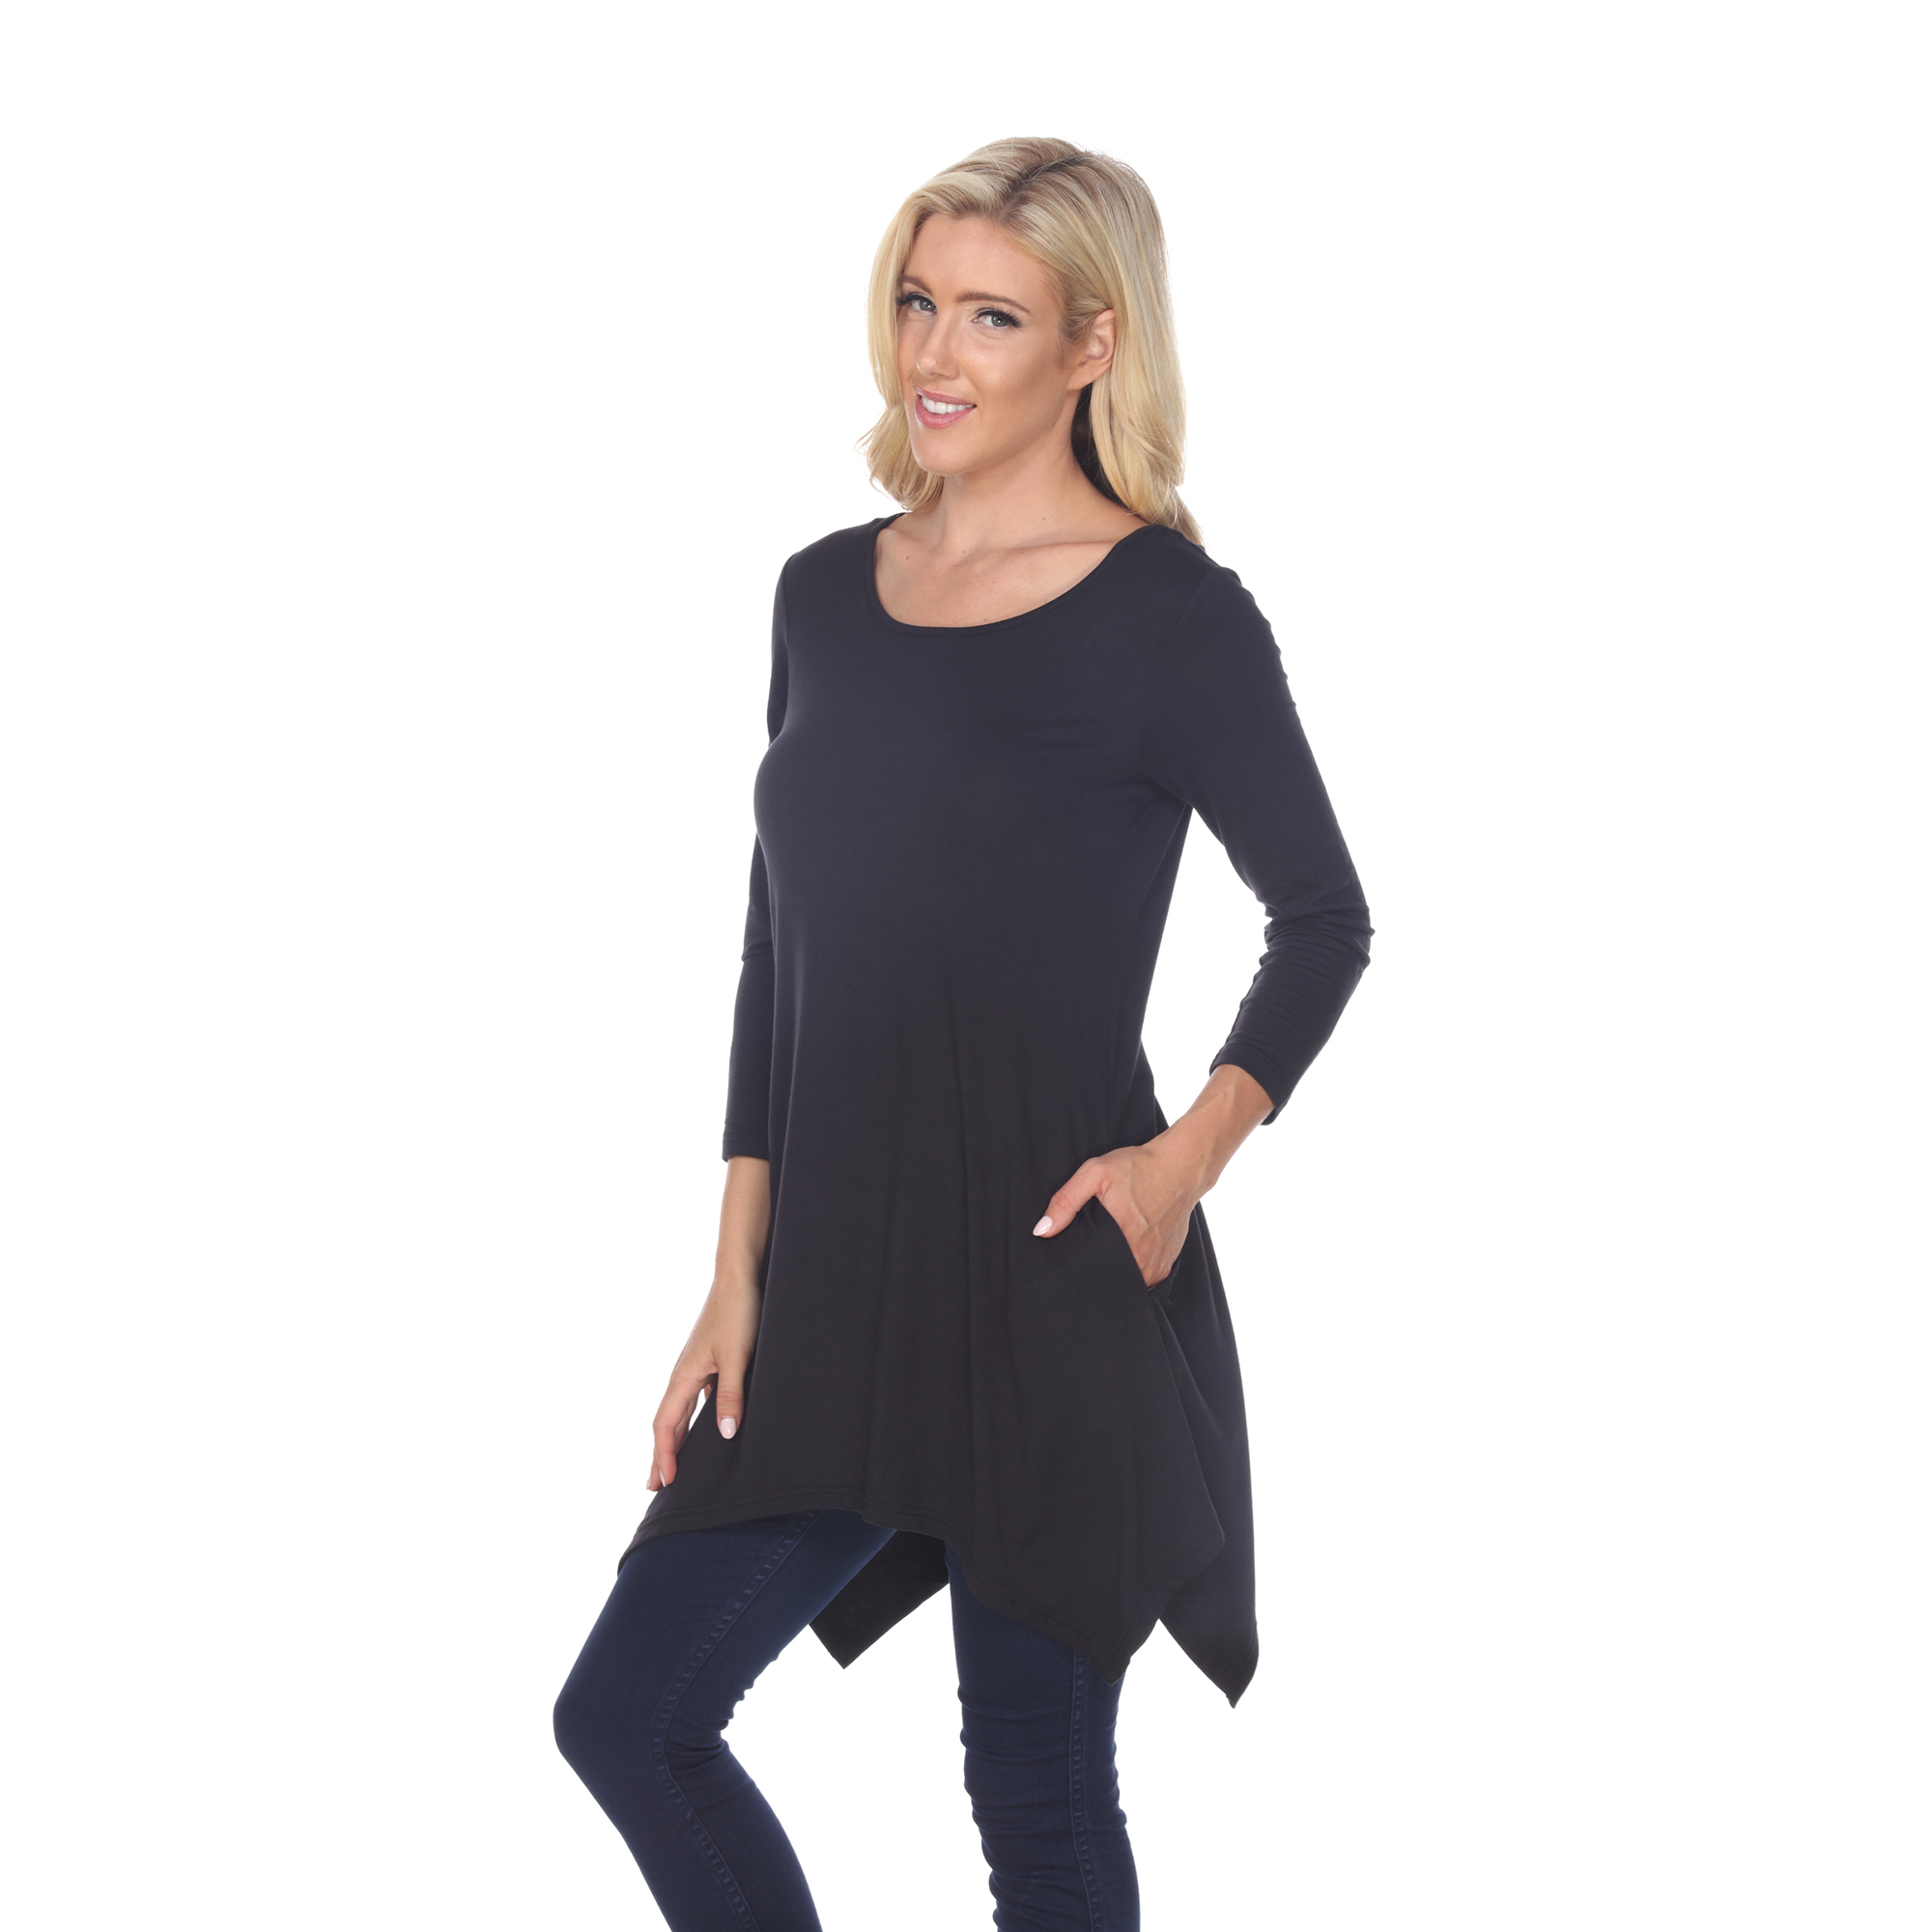 White Mark Women's Quarter Sleeve Tunic Top With Pockets - Black, 2X